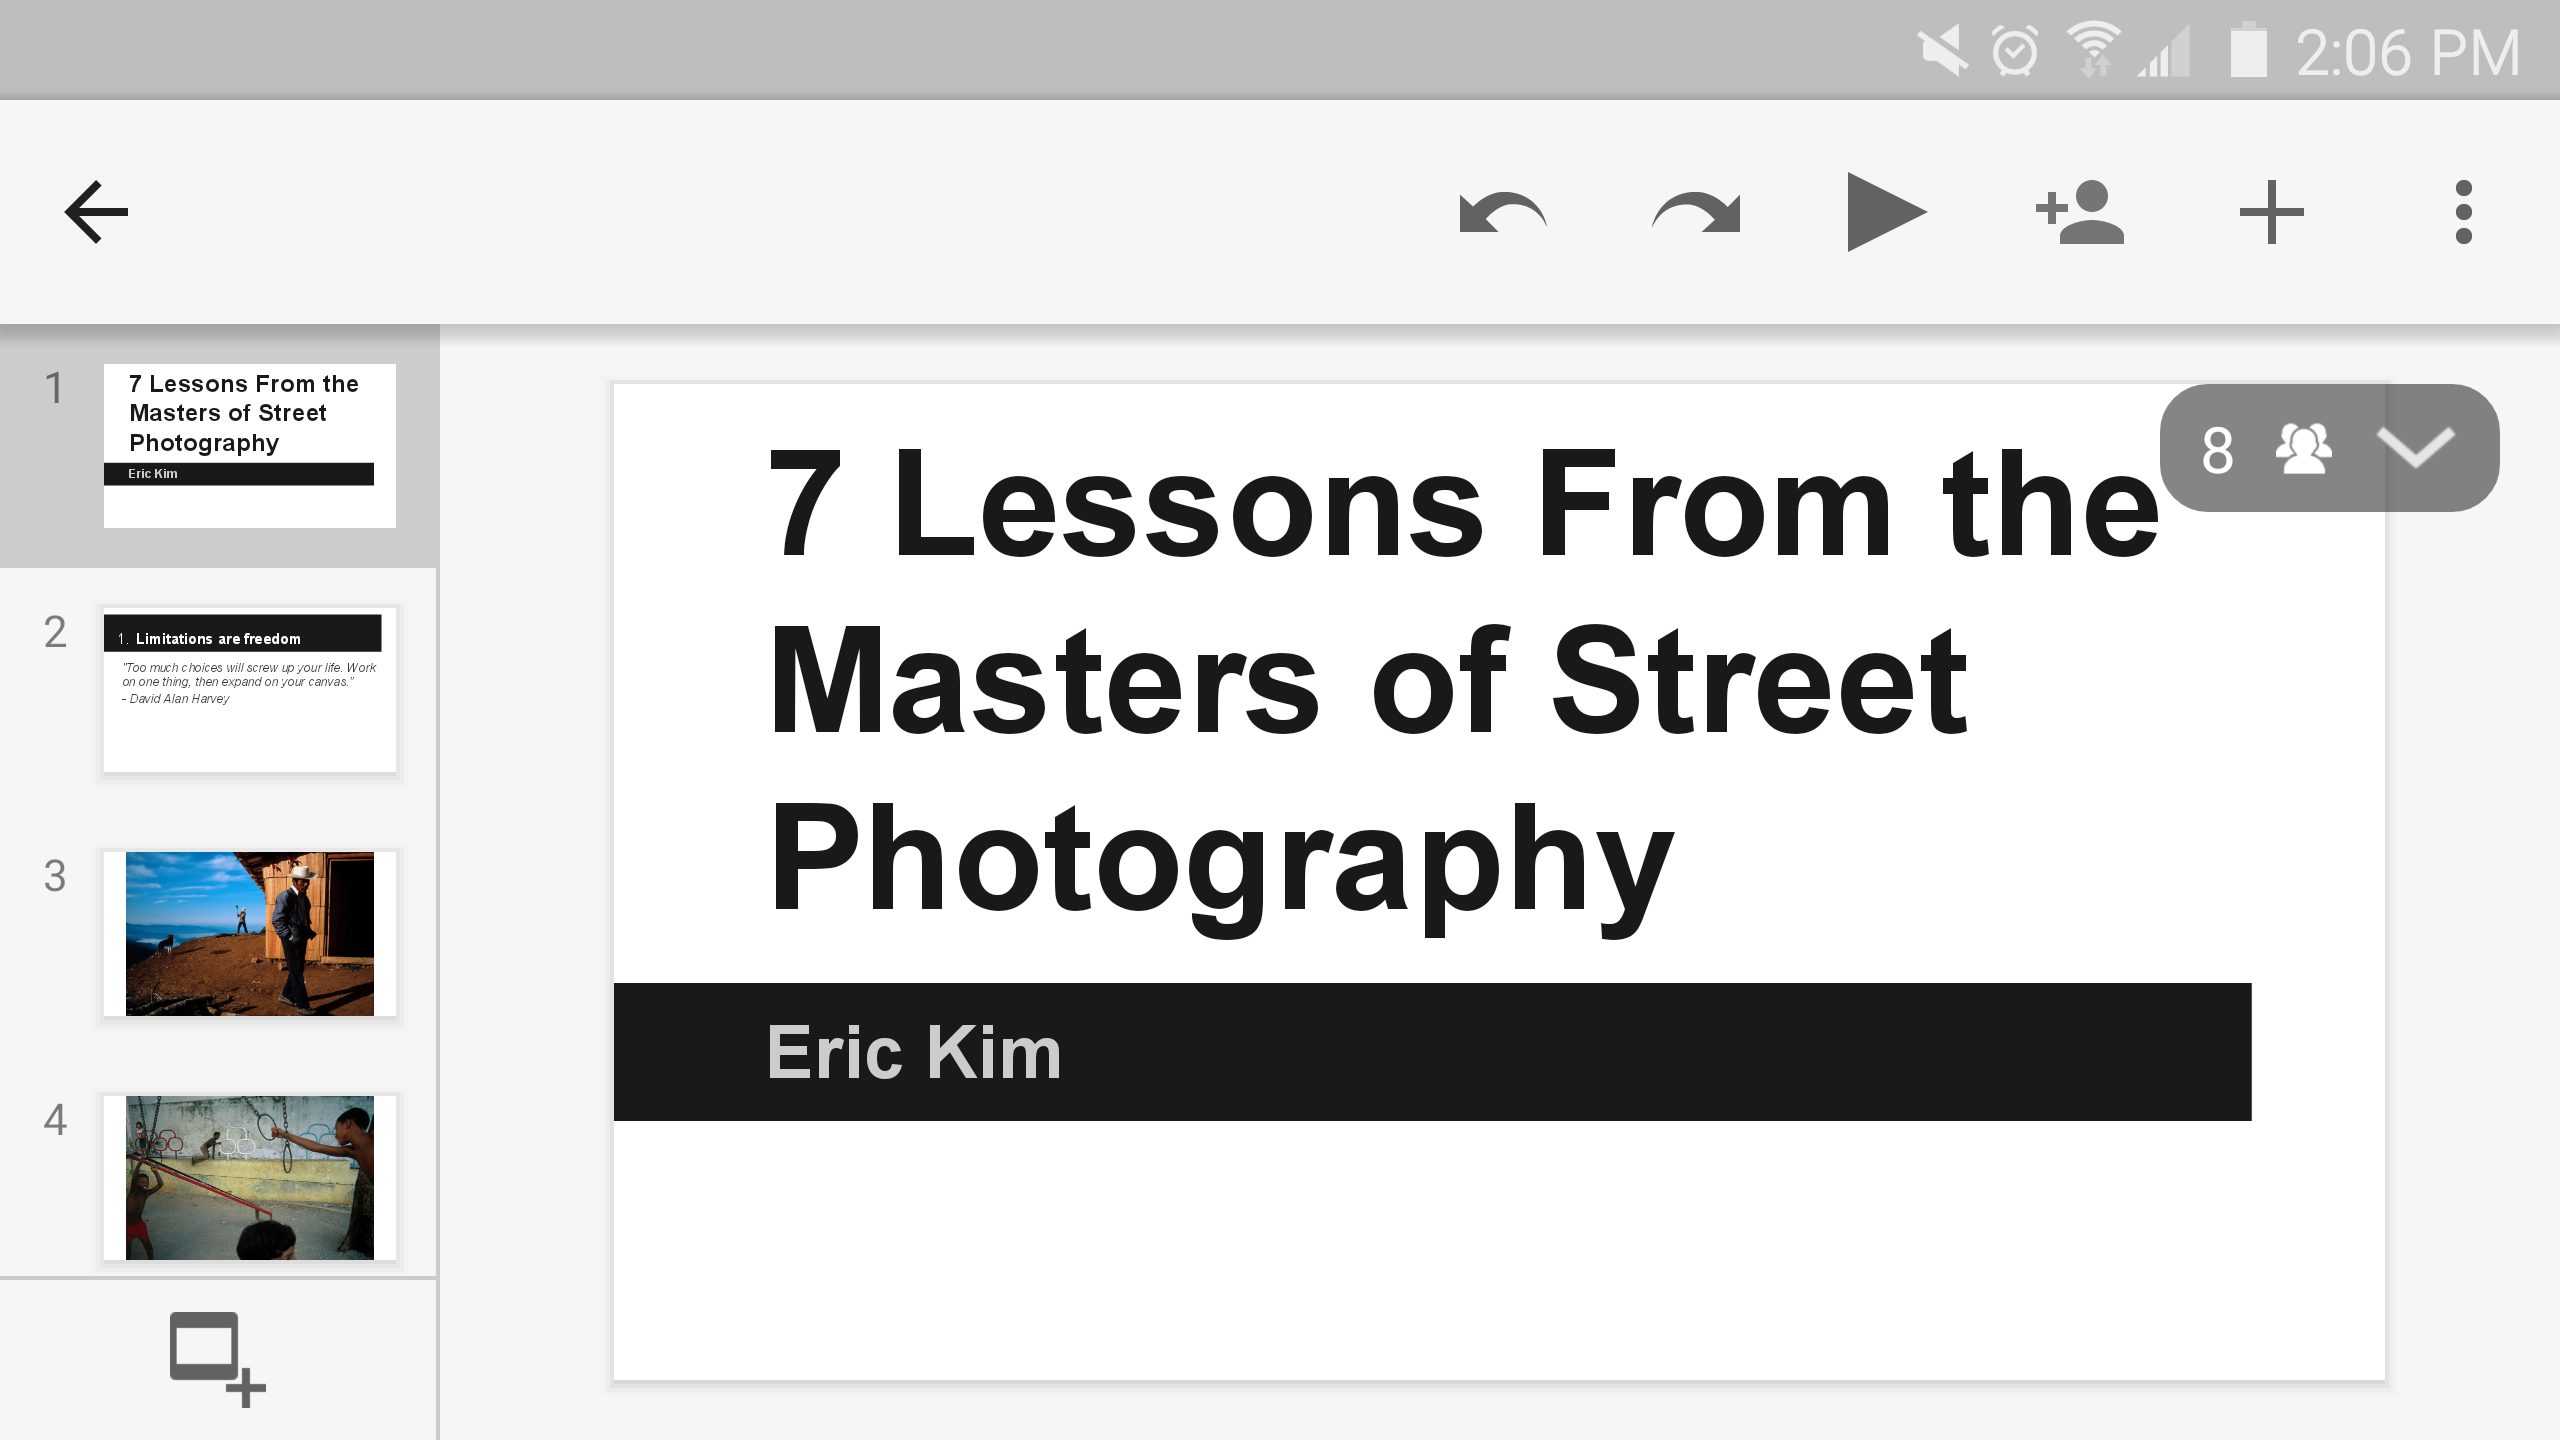 Presentation: 7 Lessons from the Masters of Street Photography